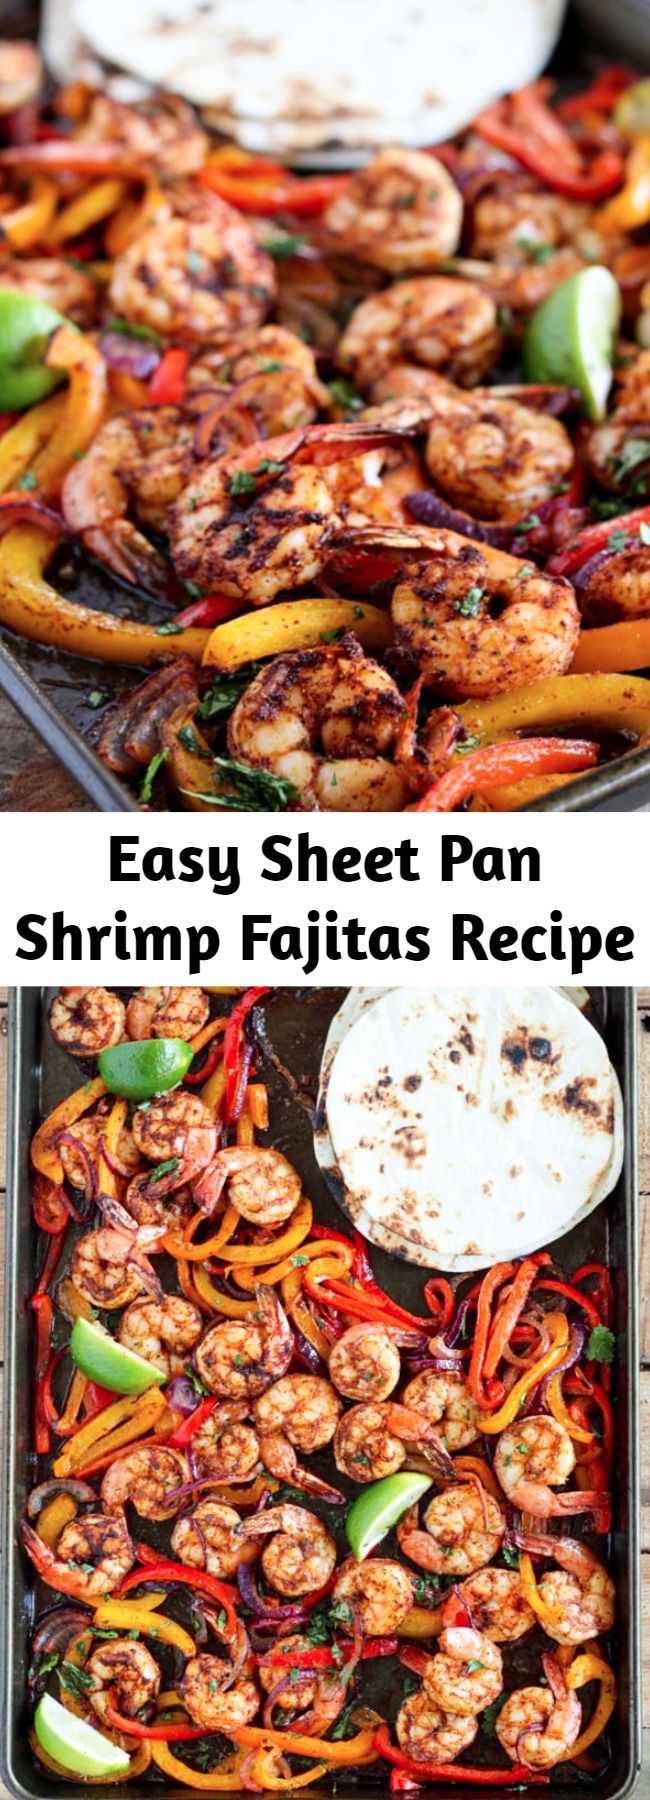 Easy Sheet Pan Shrimp Fajitas Recipe - This shrimp fajita recipe is seriously so easy and delicious! All you have to do is scoop the juicy shrimp, tender bell pepper and onions into a soft warm tortilla for a super fast and easy weeknight dinner!